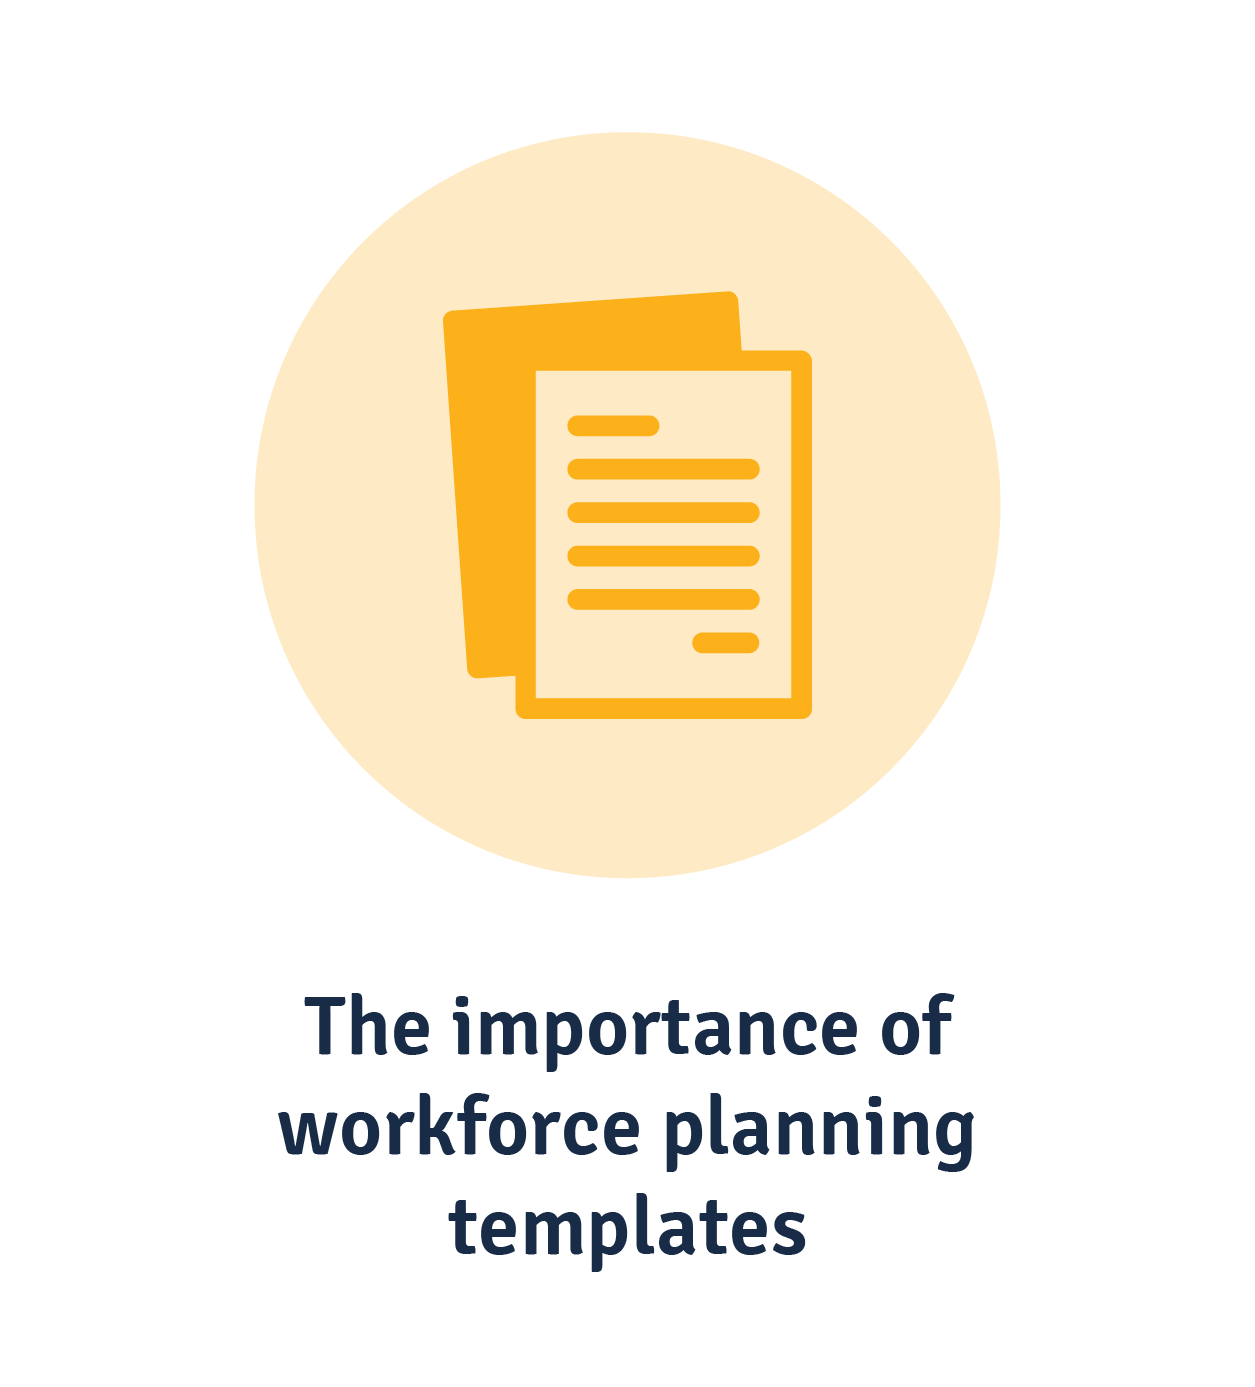 The importance of workforce planning templates